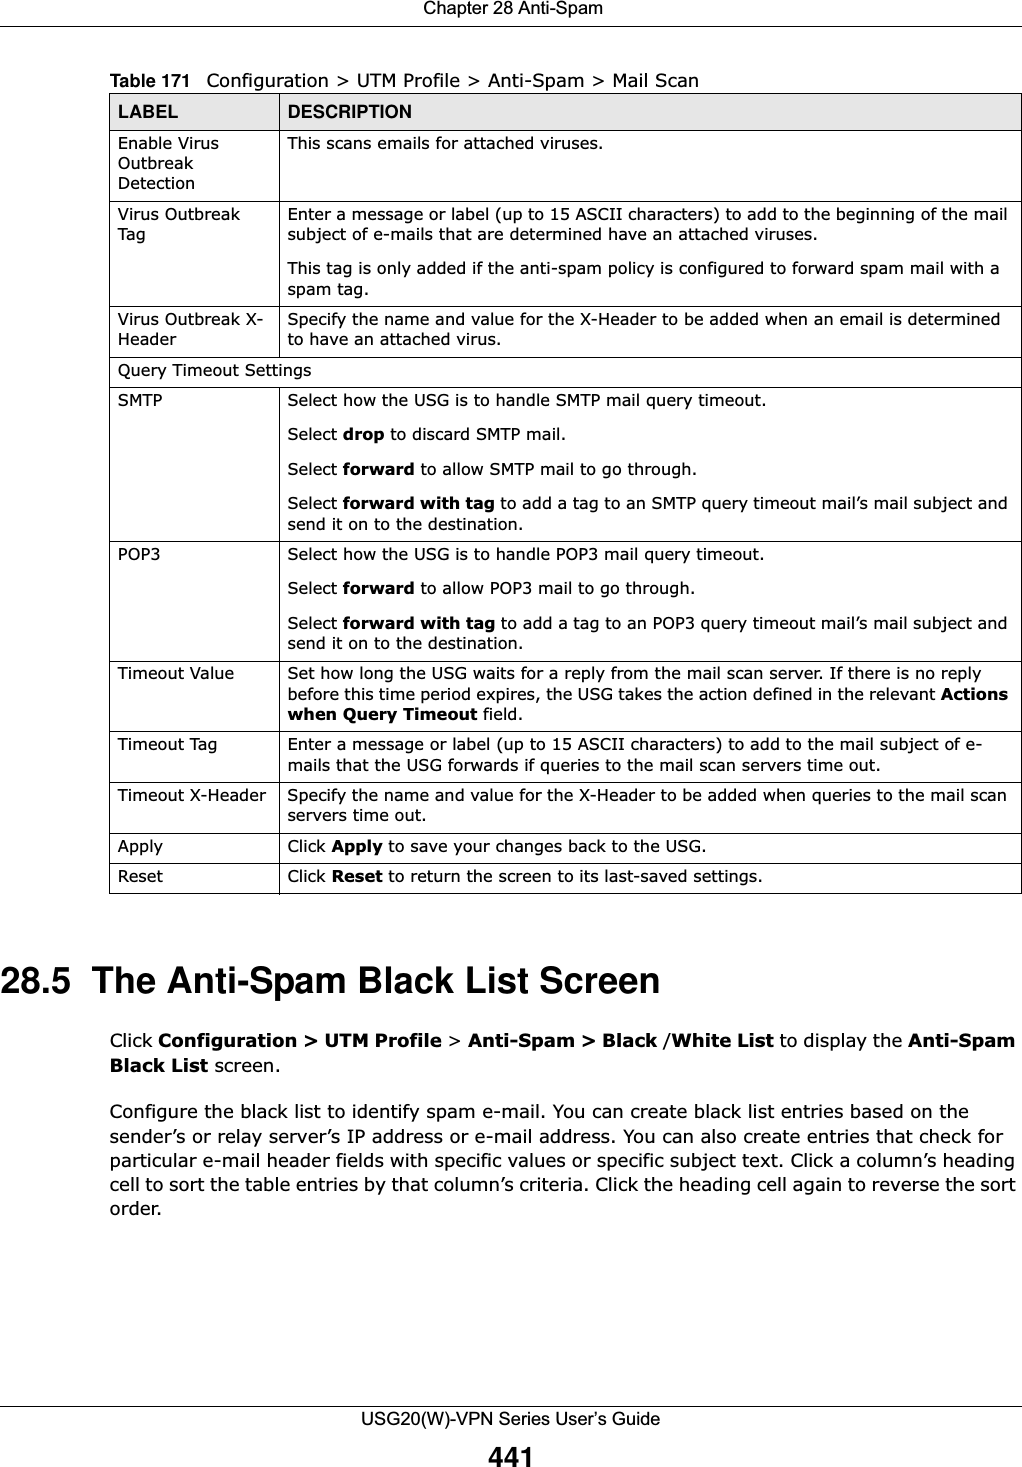  Chapter 28 Anti-SpamUSG20(W)-VPN Series User’s Guide44128.5  The Anti-Spam Black List ScreenClick Configuration &gt; UTM Profile &gt; Anti-Spam &gt; Black /White List to display the Anti-Spam Black List screen.Configure the black list to identify spam e-mail. You can create black list entries based on the sender’s or relay server’s IP address or e-mail address. You can also create entries that check for particular e-mail header fields with specific values or specific subject text. Click a column’s heading cell to sort the table entries by that column’s criteria. Click the heading cell again to reverse the sort order.Enable Virus Outbreak DetectionThis scans emails for attached viruses.Virus Outbreak TagEnter a message or label (up to 15 ASCII characters) to add to the beginning of the mail subject of e-mails that are determined have an attached viruses.This tag is only added if the anti-spam policy is configured to forward spam mail with a spam tag.Virus Outbreak X-HeaderSpecify the name and value for the X-Header to be added when an email is determined to have an attached virus.Query Timeout SettingsSMTP Select how the USG is to handle SMTP mail query timeout.Select drop to discard SMTP mail.Select forward to allow SMTP mail to go through.Select forward with tag to add a tag to an SMTP query timeout mail’s mail subject and send it on to the destination. POP3 Select how the USG is to handle POP3 mail query timeout.Select forward to allow POP3 mail to go through.Select forward with tag to add a tag to an POP3 query timeout mail’s mail subject and send it on to the destination. Timeout Value Set how long the USG waits for a reply from the mail scan server. If there is no reply before this time period expires, the USG takes the action defined in the relevant Actions when Query Timeout field.Timeout Tag Enter a message or label (up to 15 ASCII characters) to add to the mail subject of e-mails that the USG forwards if queries to the mail scan servers time out. Timeout X-Header Specify the name and value for the X-Header to be added when queries to the mail scan servers time out.Apply Click Apply to save your changes back to the USG.Reset Click Reset to return the screen to its last-saved settings. Table 171   Configuration &gt; UTM Profile &gt; Anti-Spam &gt; Mail ScanLABEL DESCRIPTION